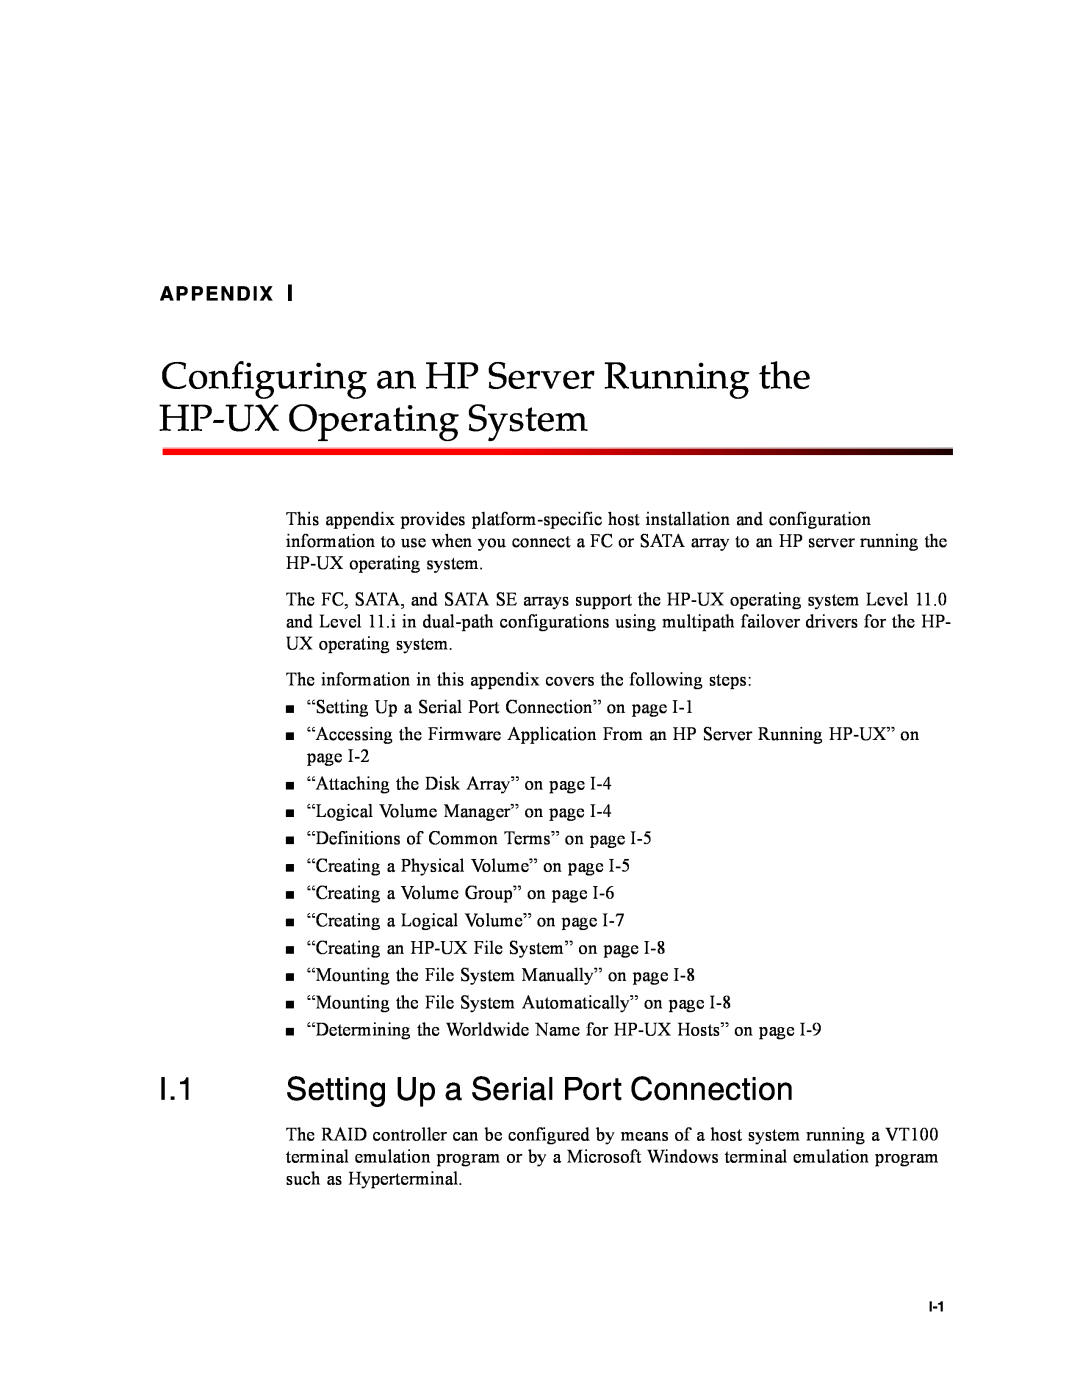 Dot Hill Systems II 200 FC service manual Configuring an HP Server Running the HP-UX Operating System, Appendix 